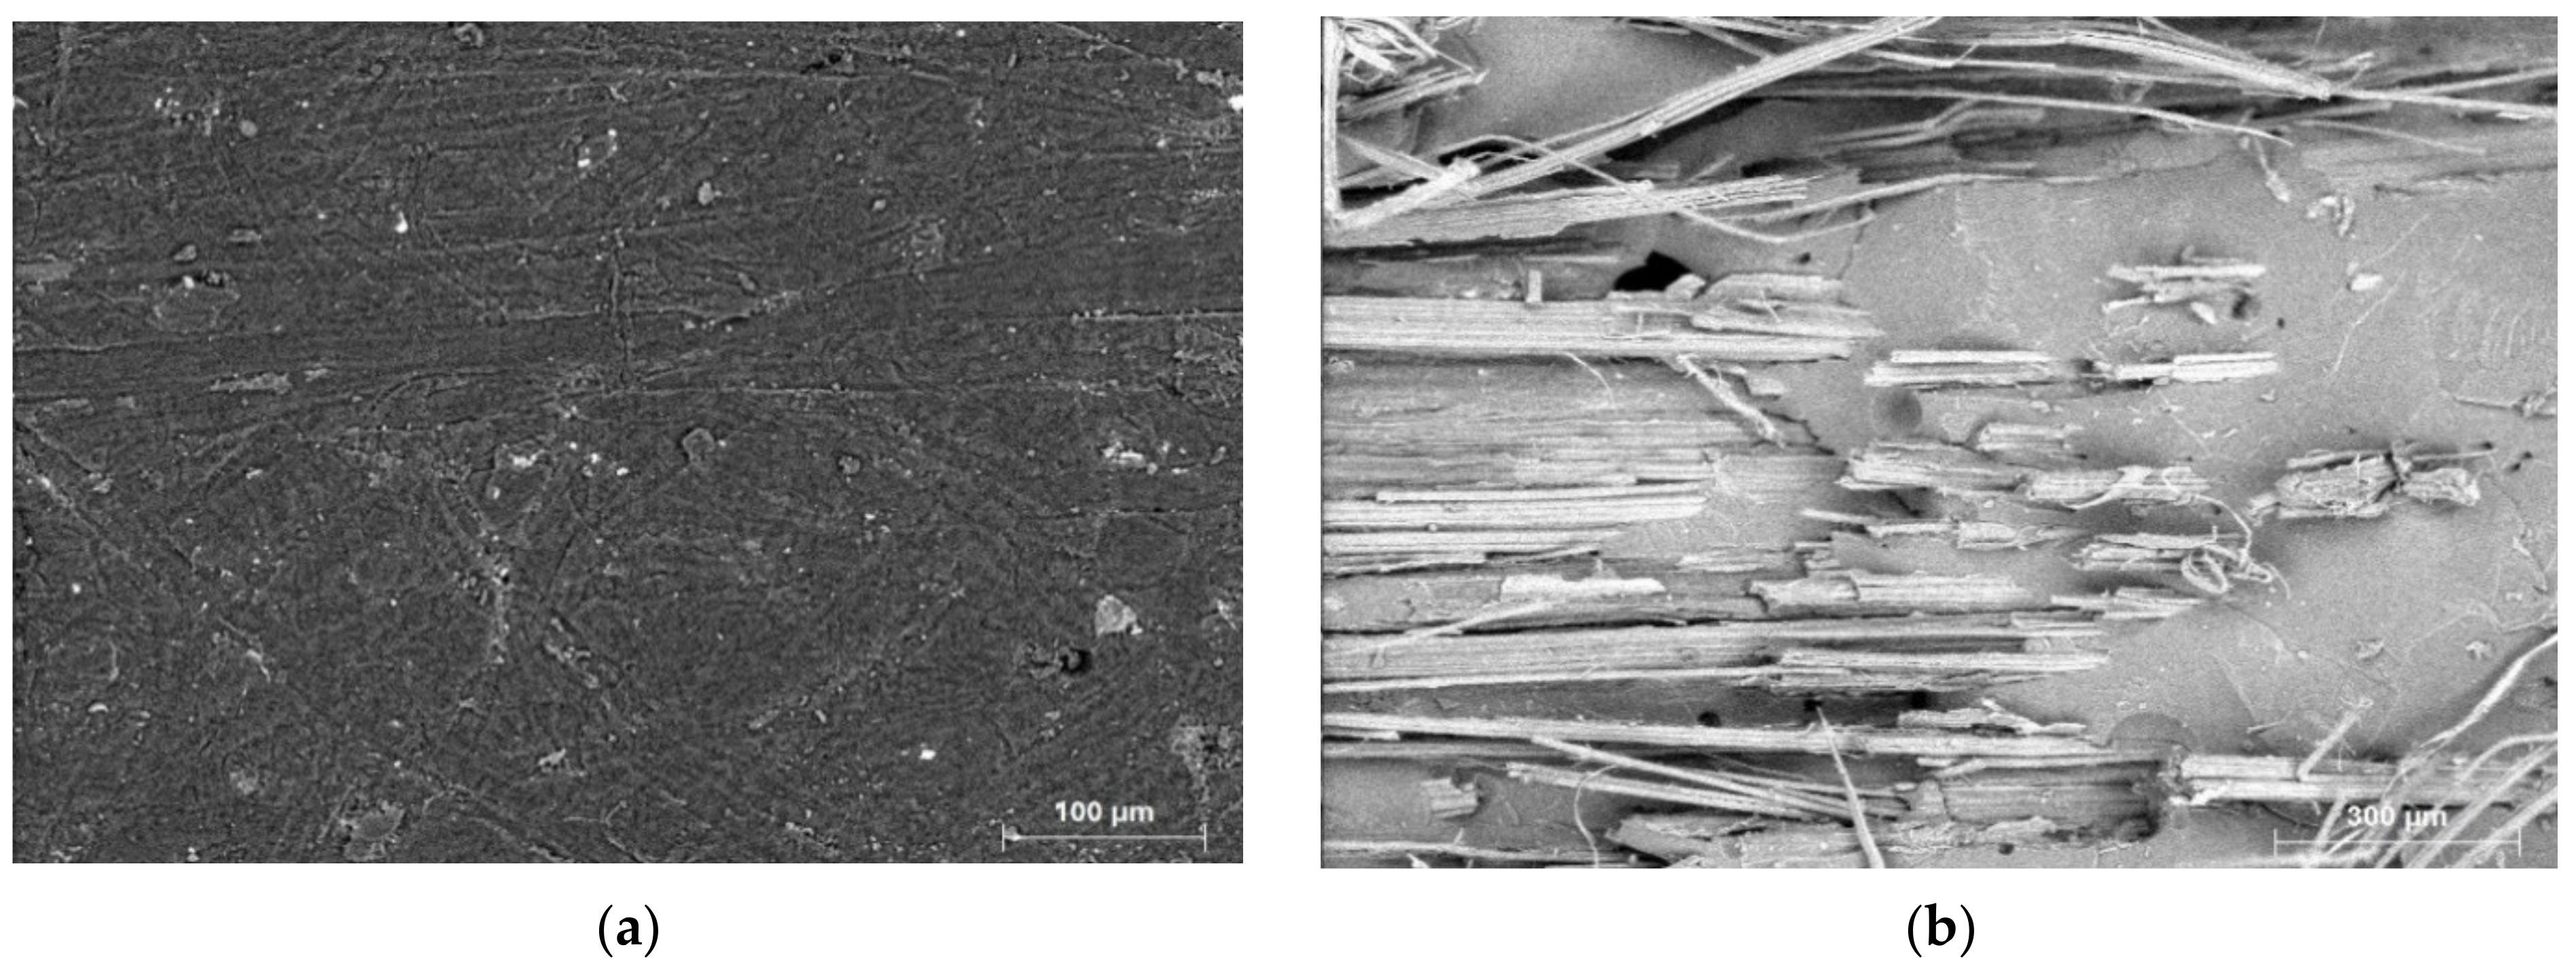 SciELO - Brasil - Mechanical properties and fractography of cement-based  composites reinforced by natural piassava and jute fibers Mechanical  properties and fractography of cement-based composites reinforced by  natural piassava and jute fibers